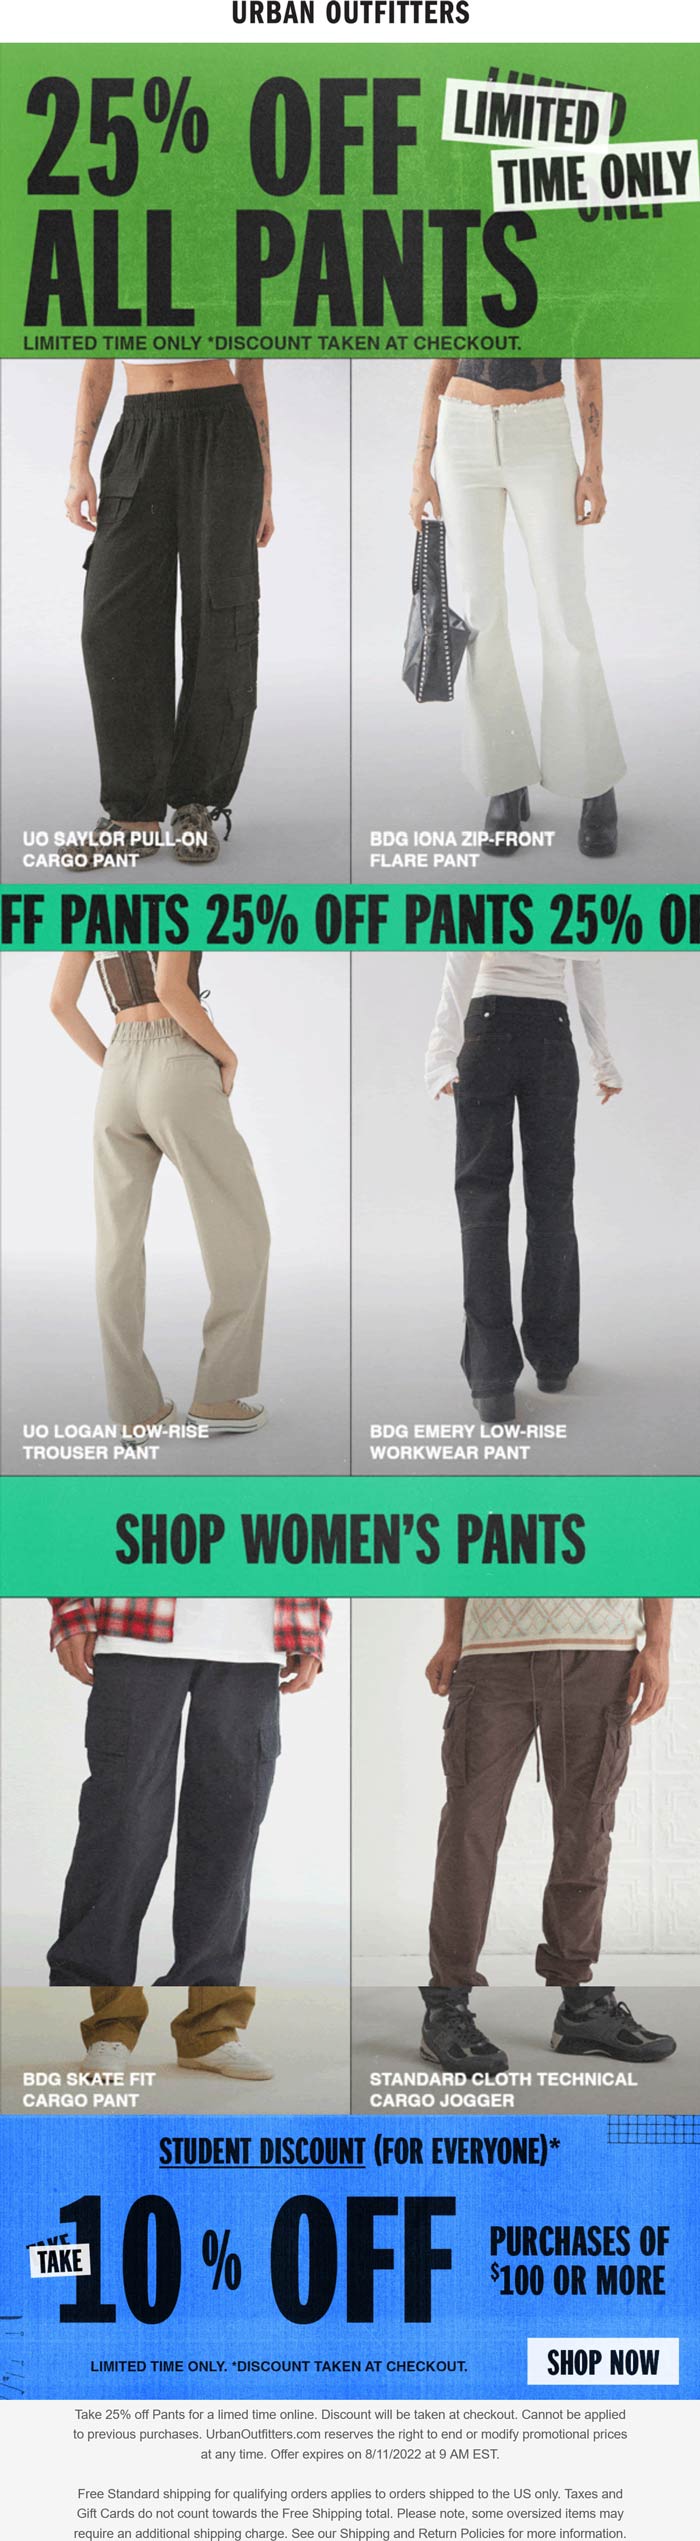 Urban Outfitters stores Coupon  25% off all pants online at Urban Outfitters #urbanoutfitters 